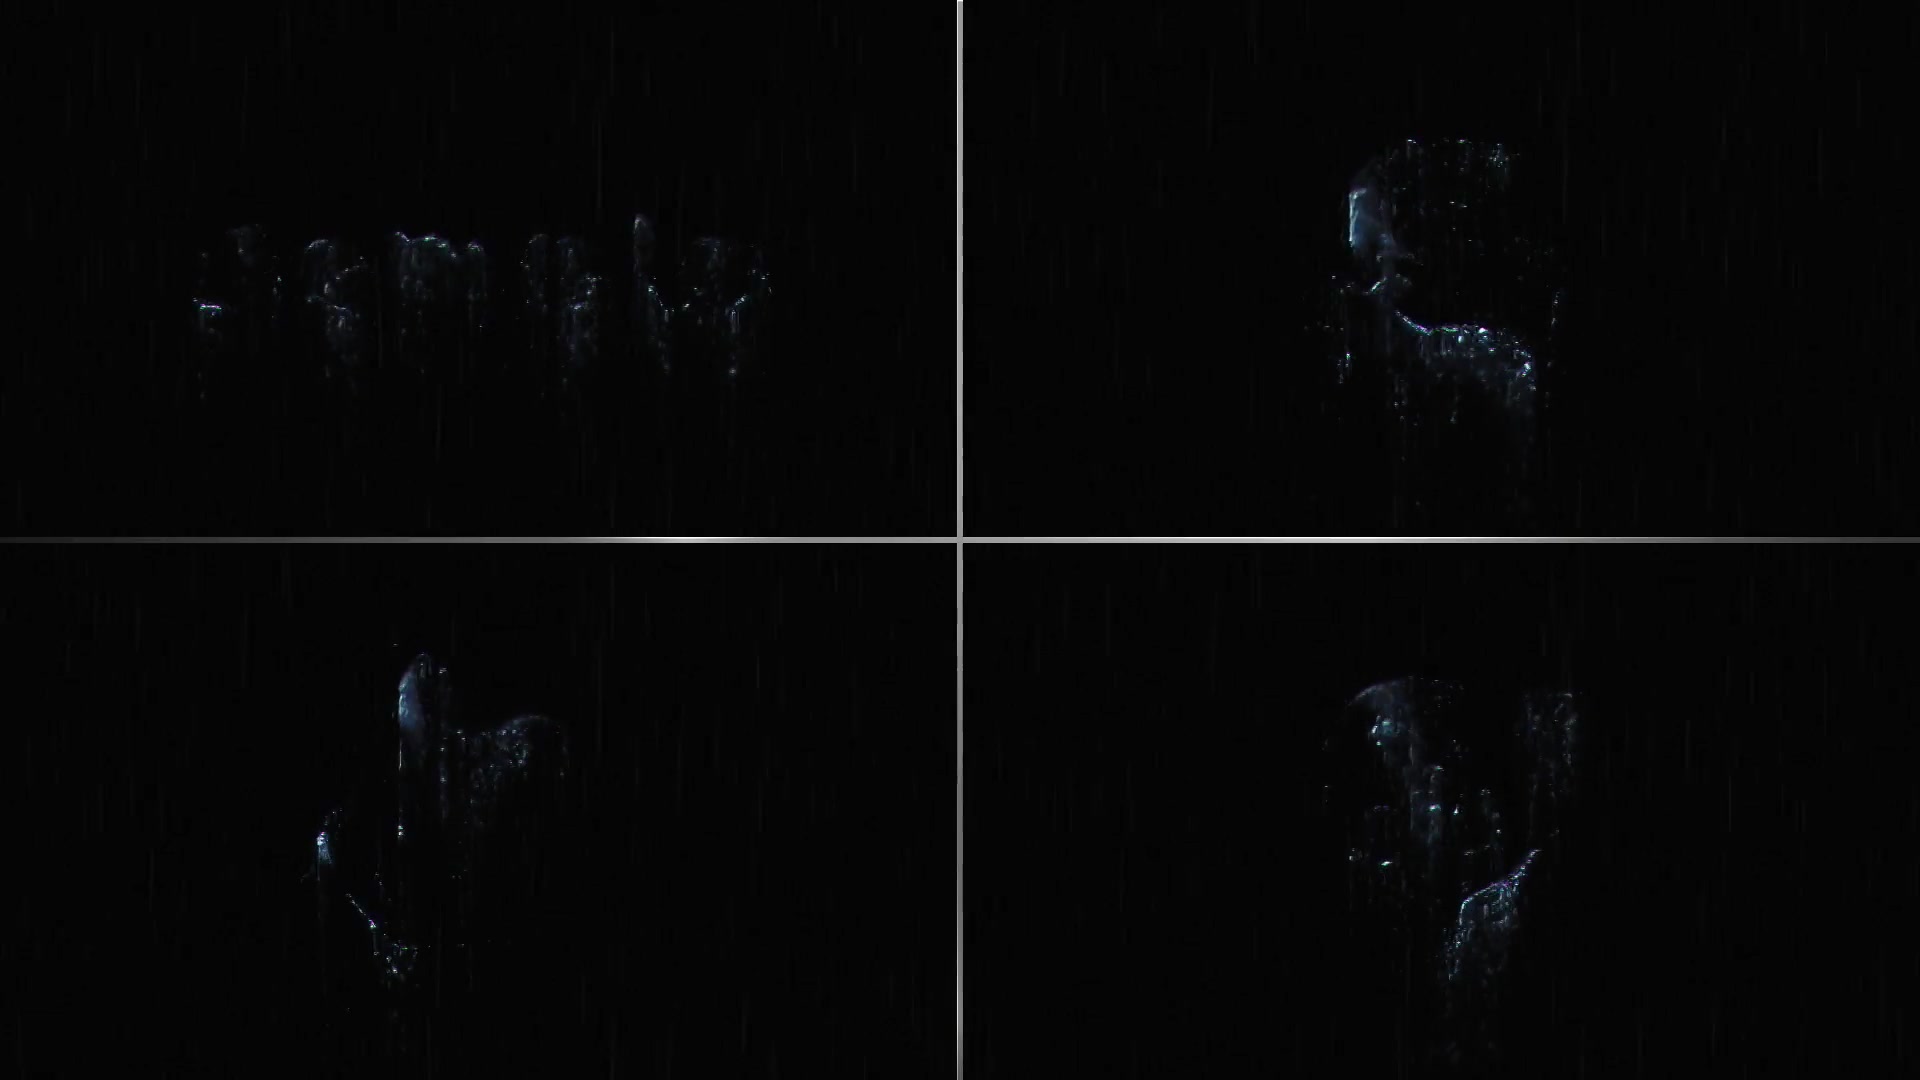 Water Logo Reveal - Download Videohive 19003434